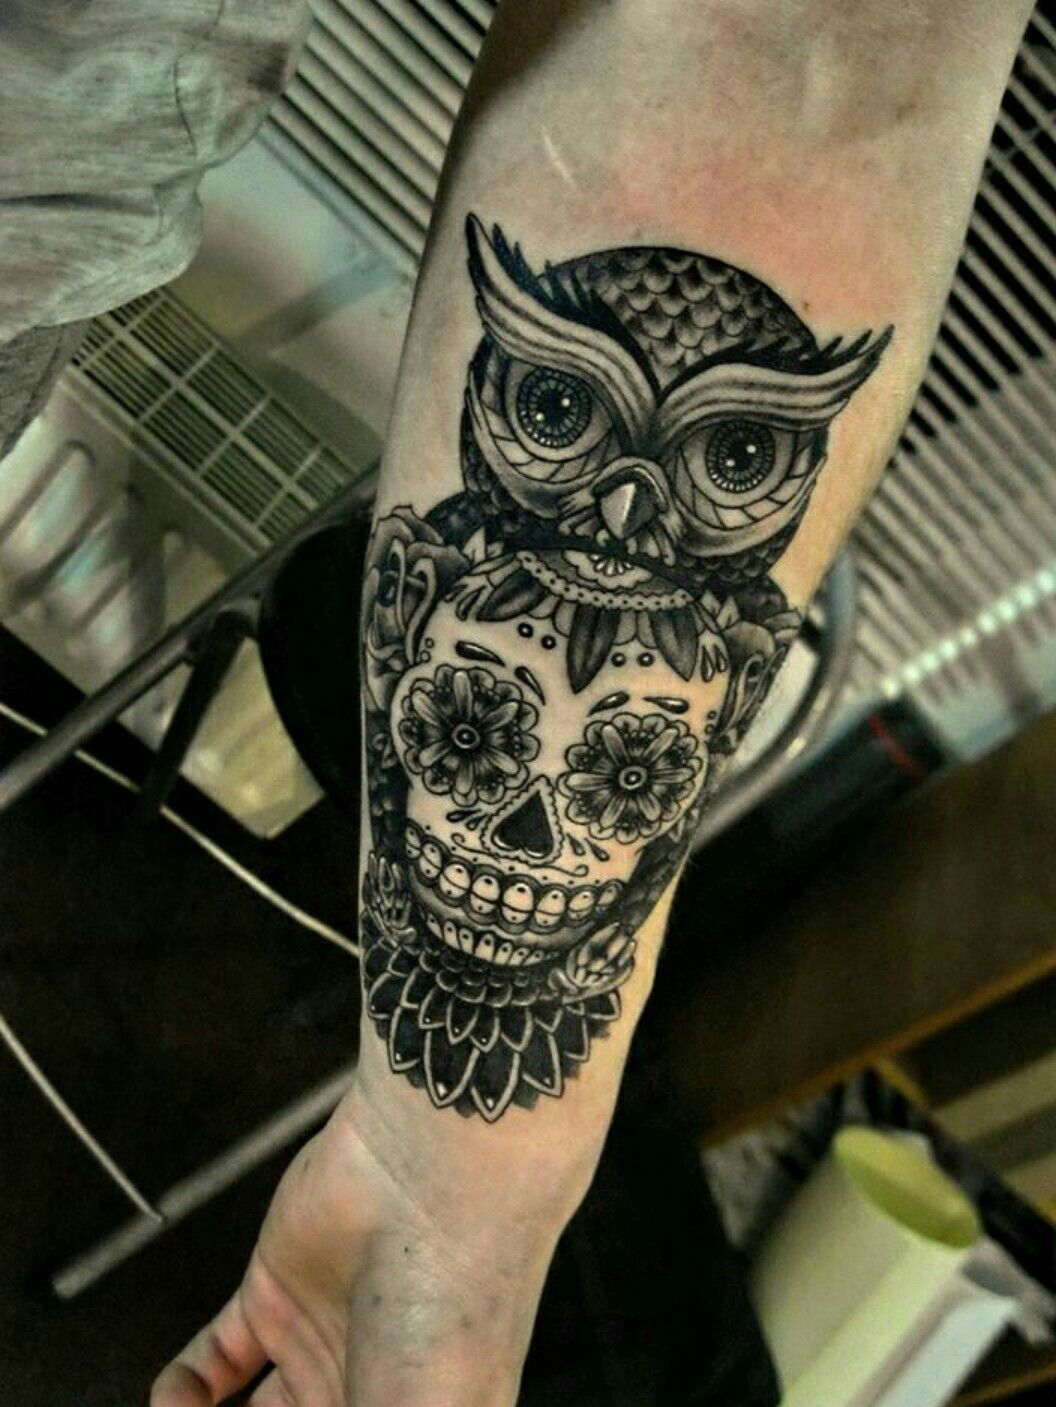 ADDU Tattoos  A Skull Owl Tattoo can be worn as a way to  Facebook